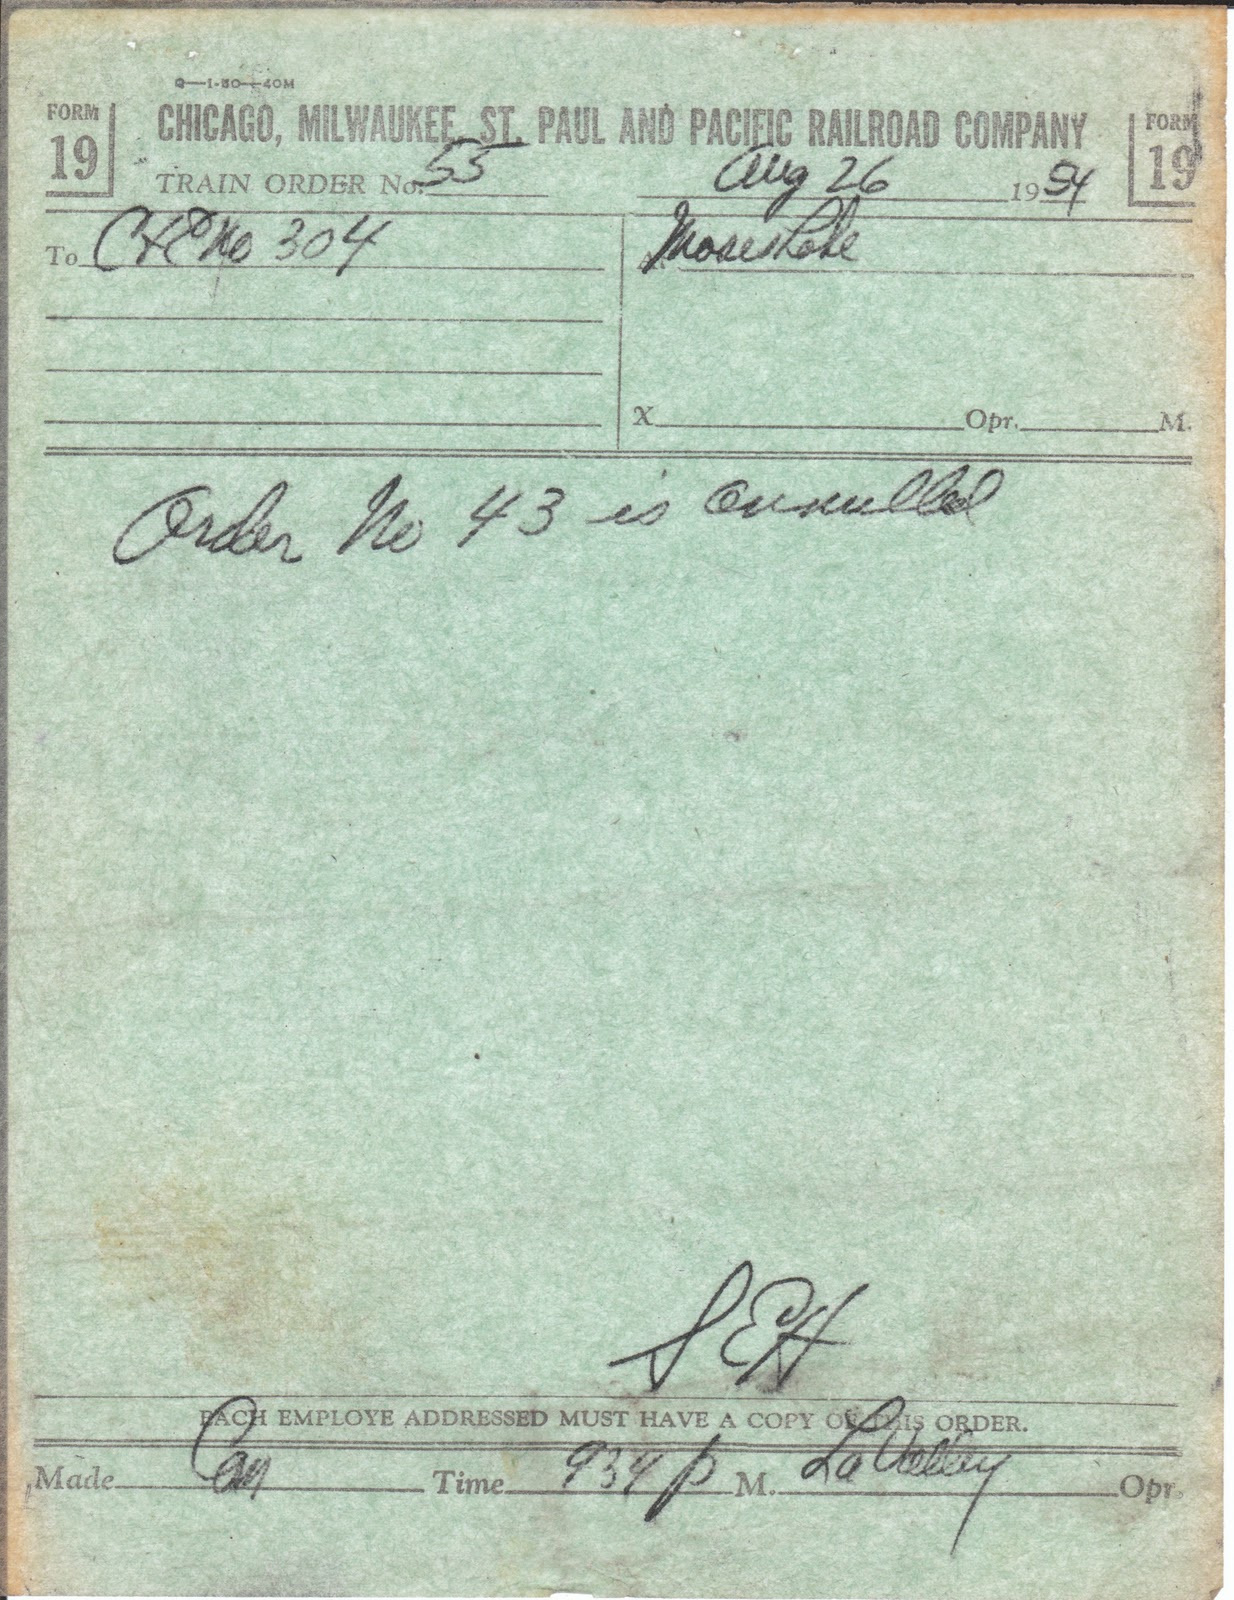 Big Bend Railroad History: Moses Lake Trainorder and Clearance Form